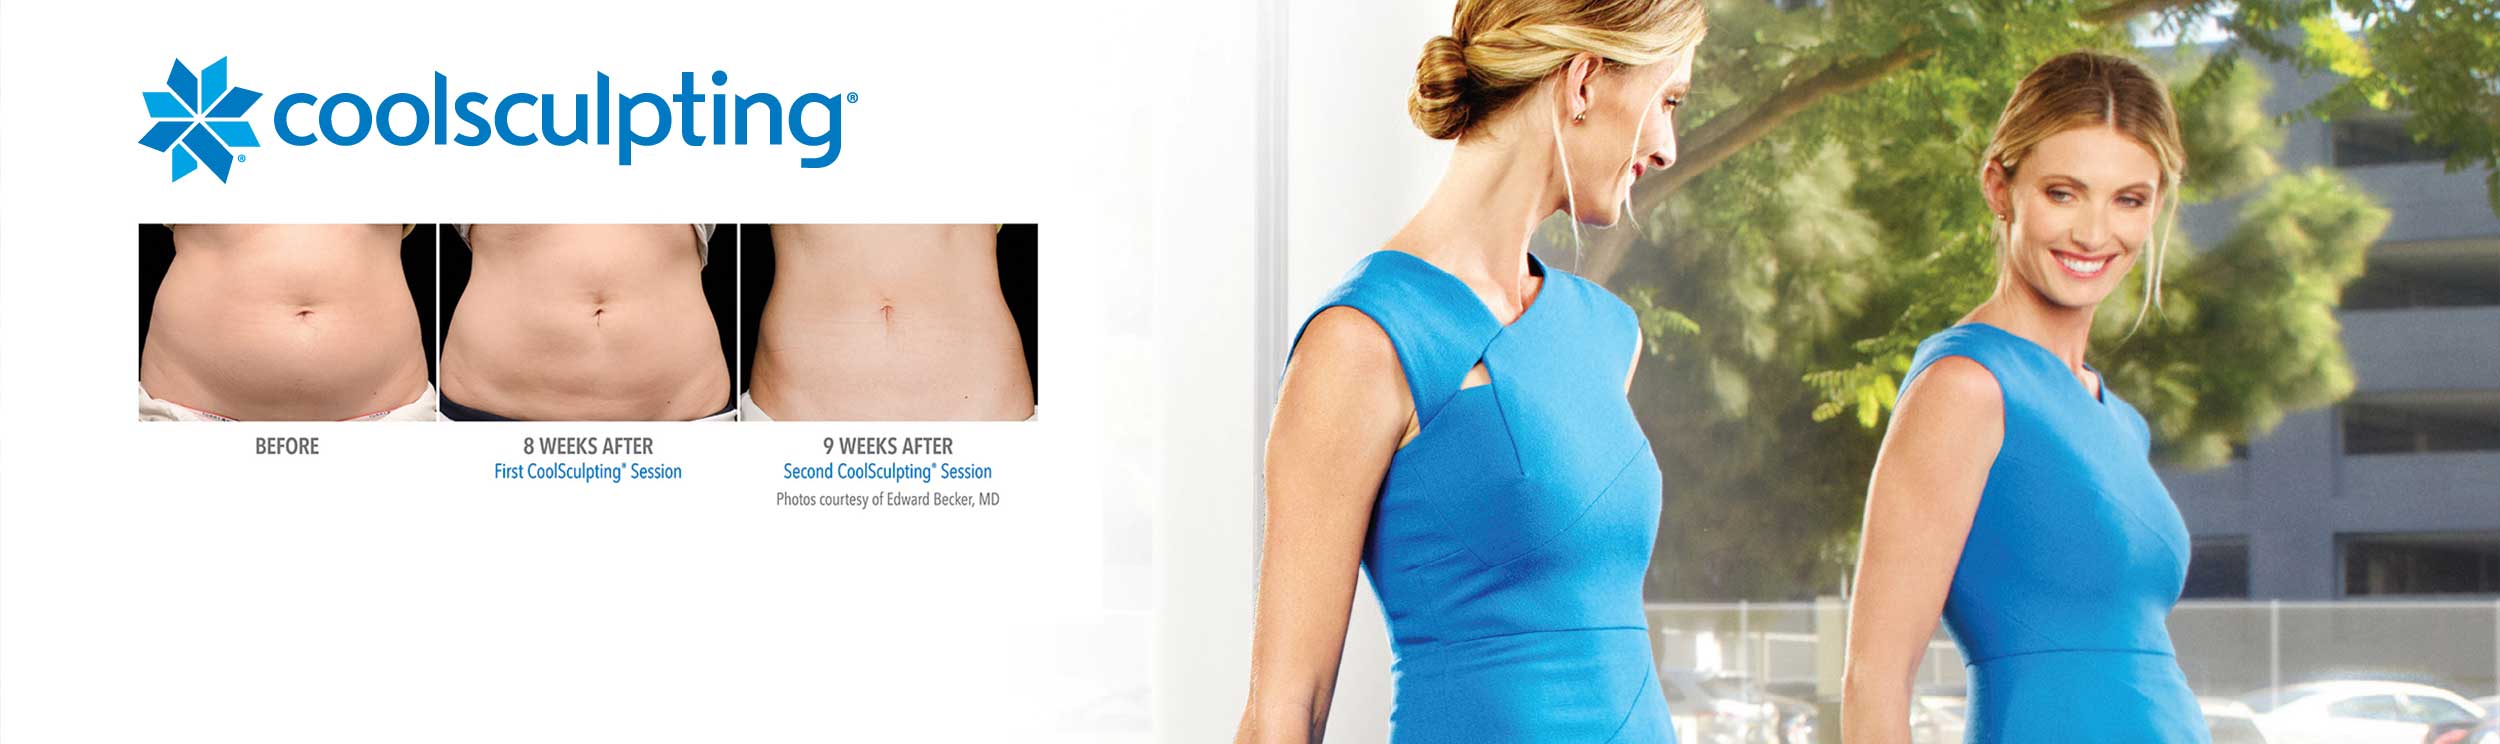 home-page-coolsculpting